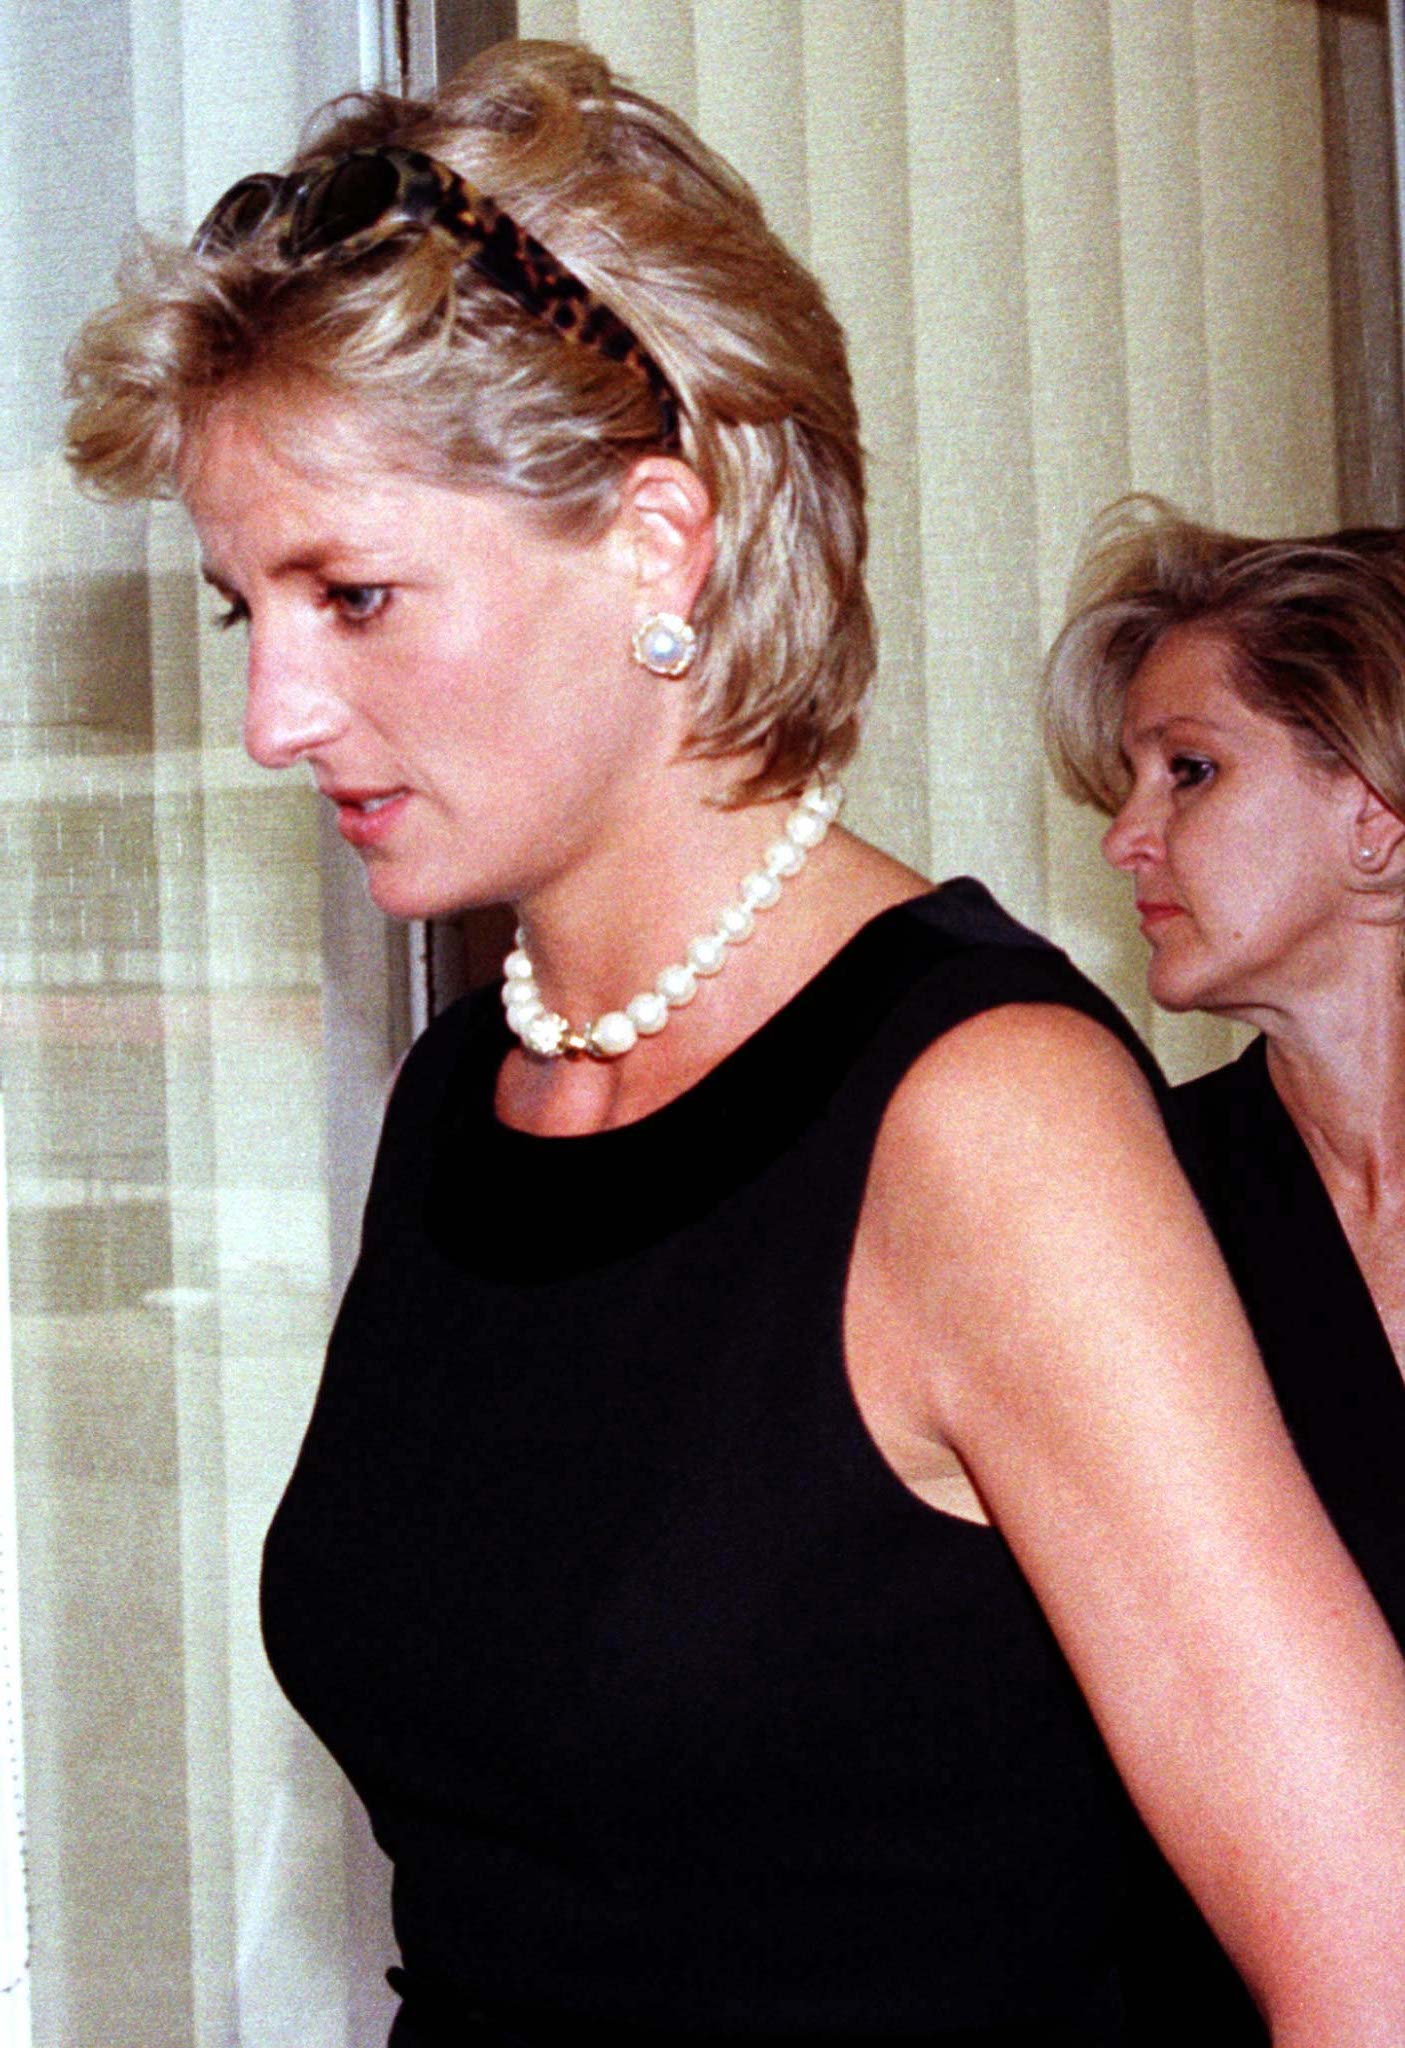 Britain's Princess Diana leaves the VIP hall at Athens' international airport September 18. Diana left the airport by car for the funeral of Yannis Kalyviotis, a young man she met during one of her mercy visits to a London hospital. GREECE DIANA